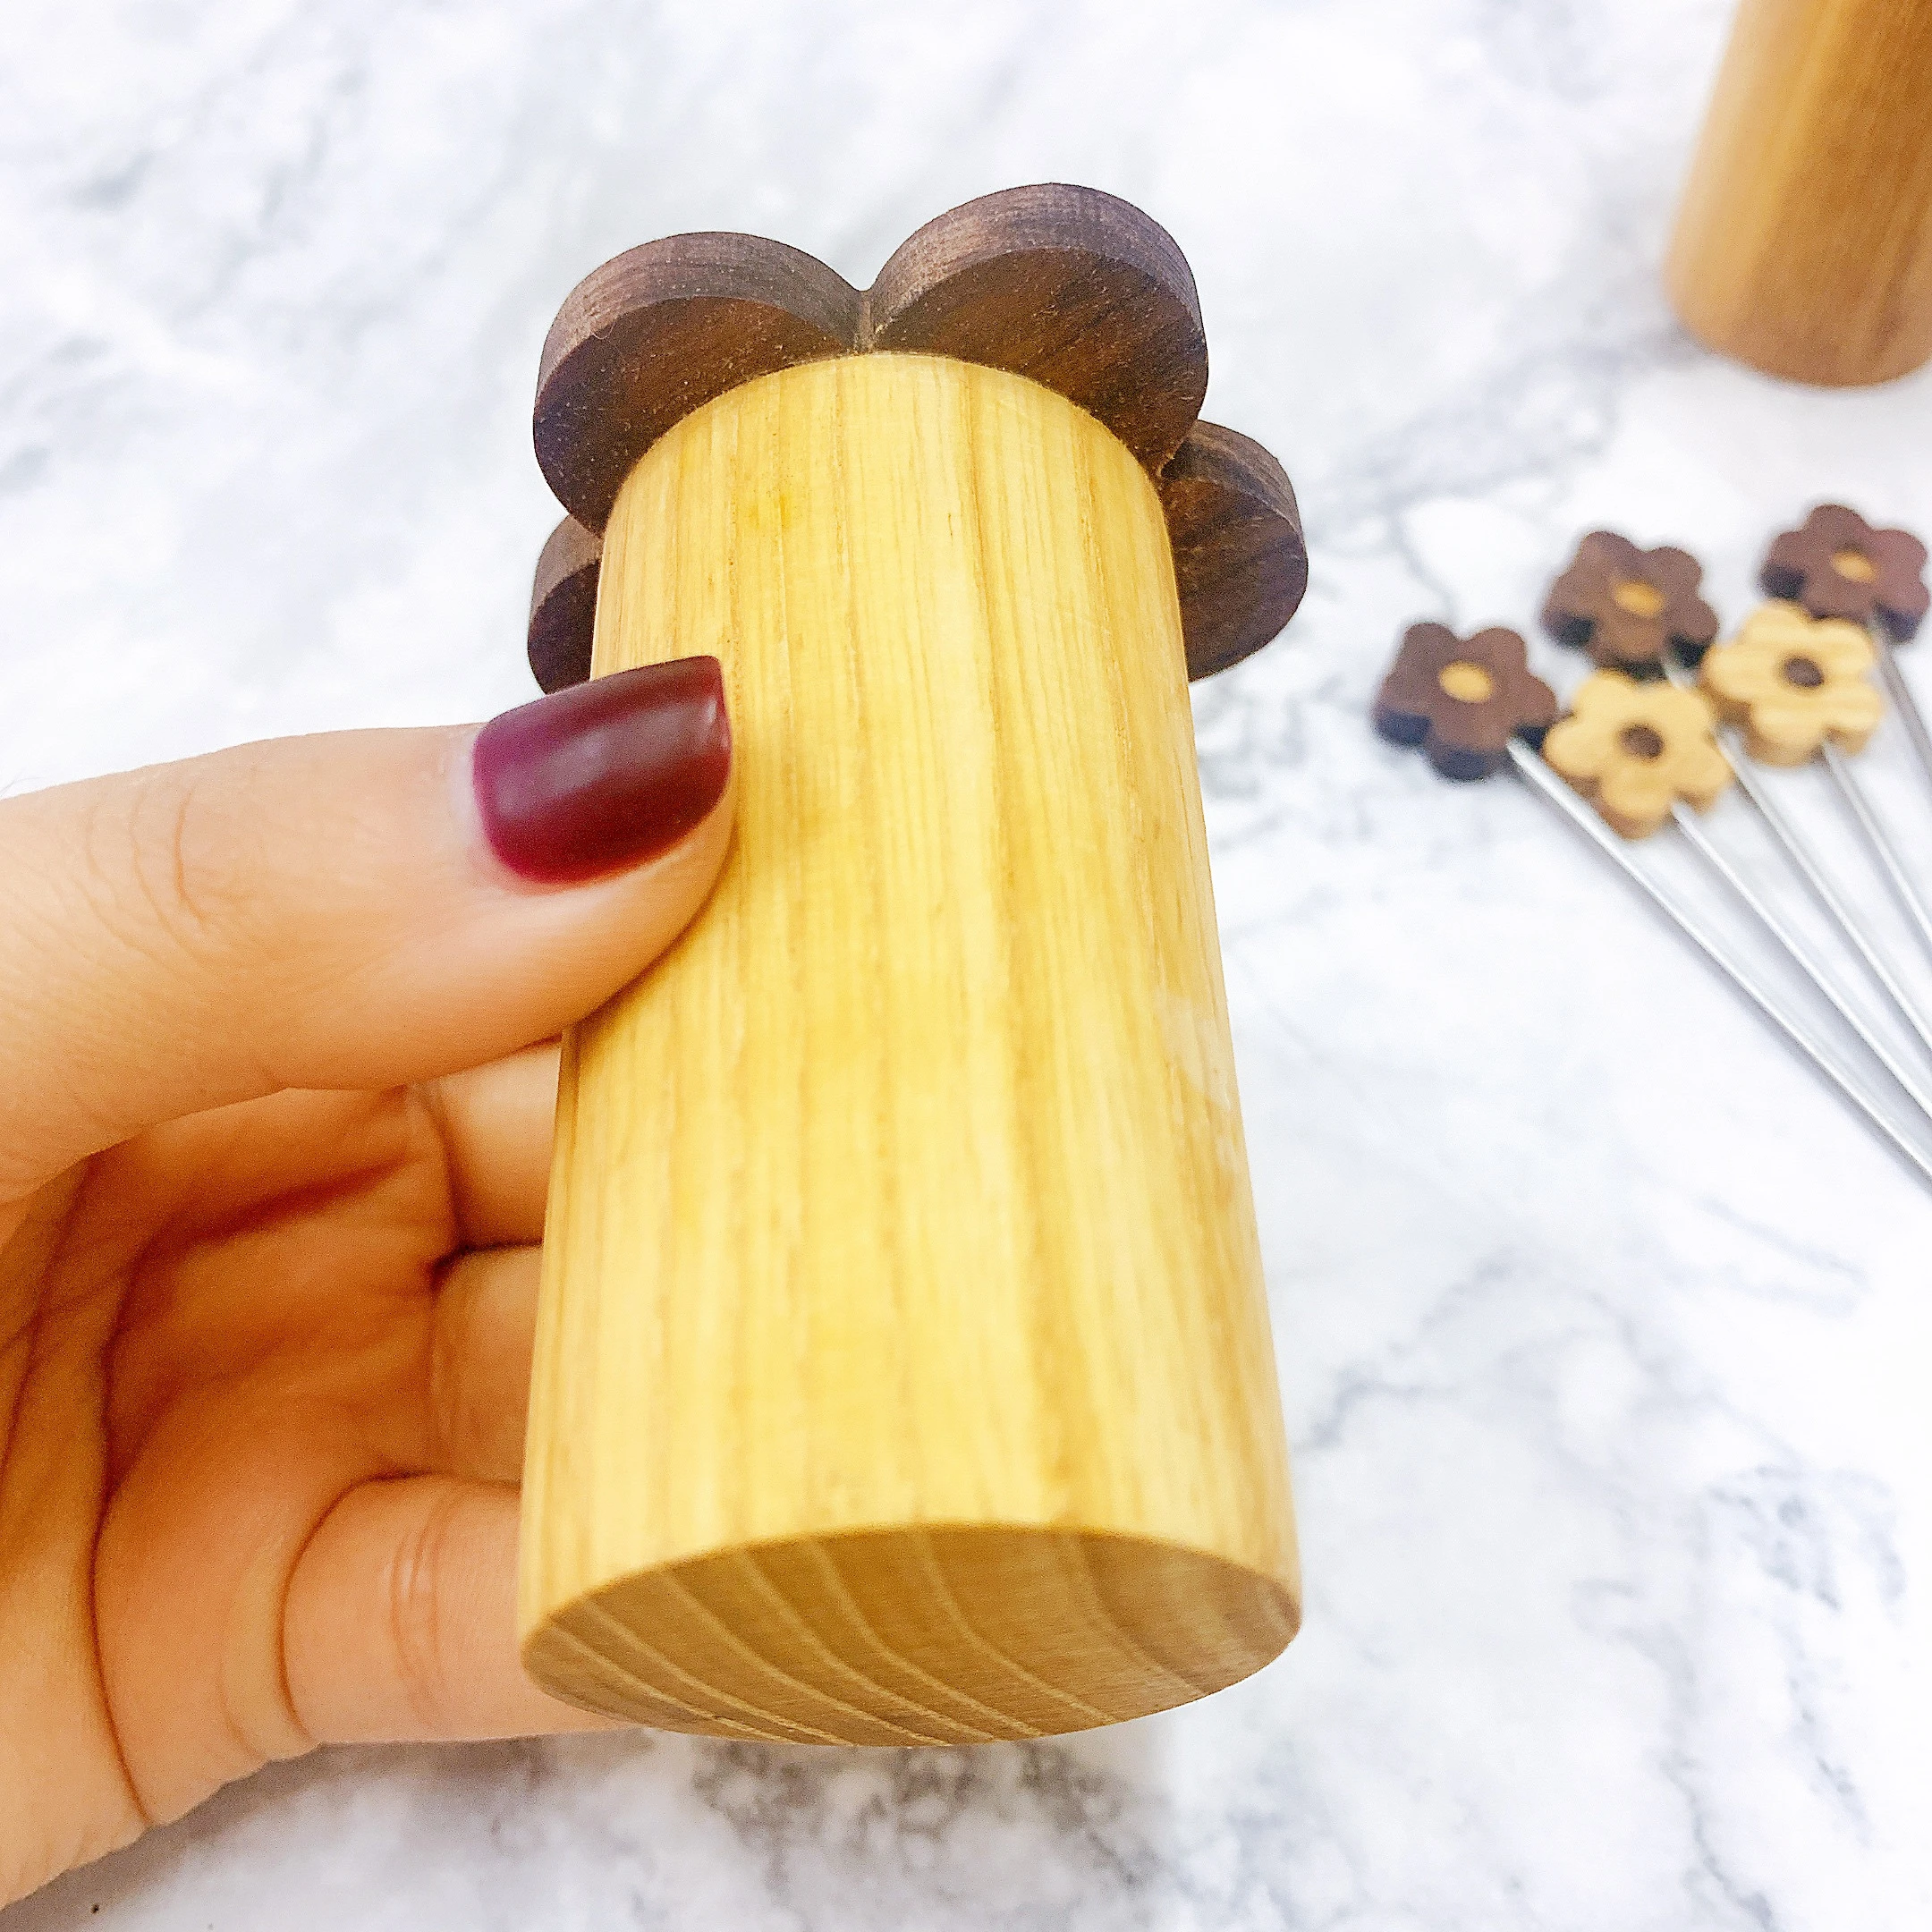 Cute Design Walnut Wood and  Stainless Stain Flower Plant Sticks  Fruit Metal Cocktail Picks Skewers with holder